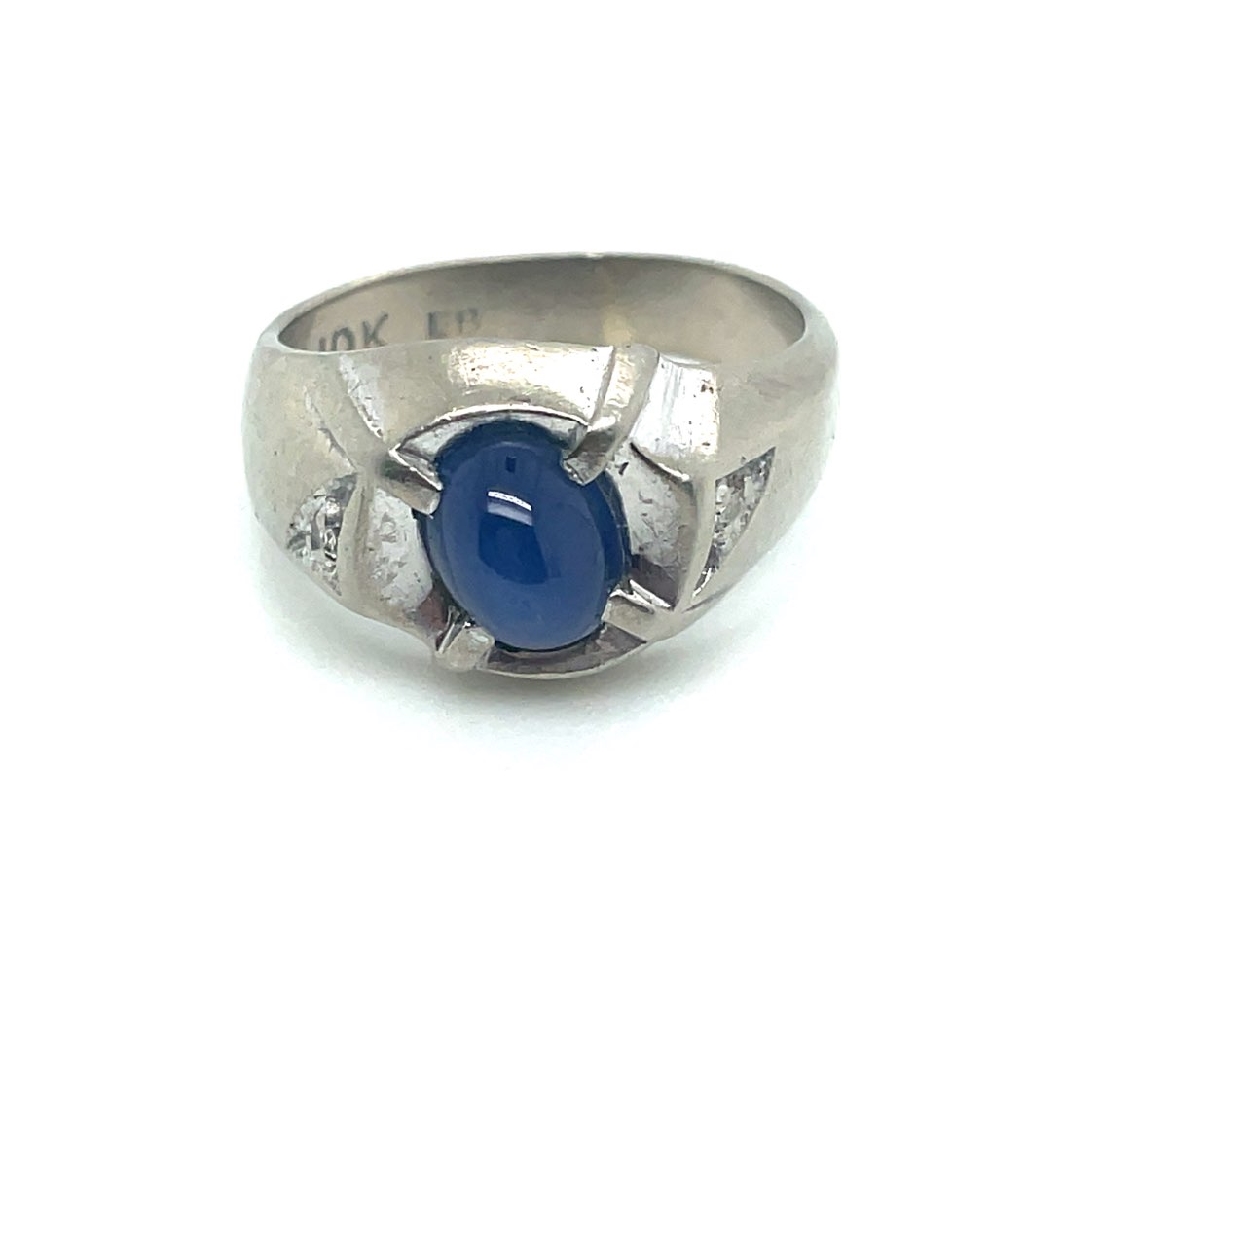 10K White Gold Star Sapphire Ring with Small Diamonds Size 7